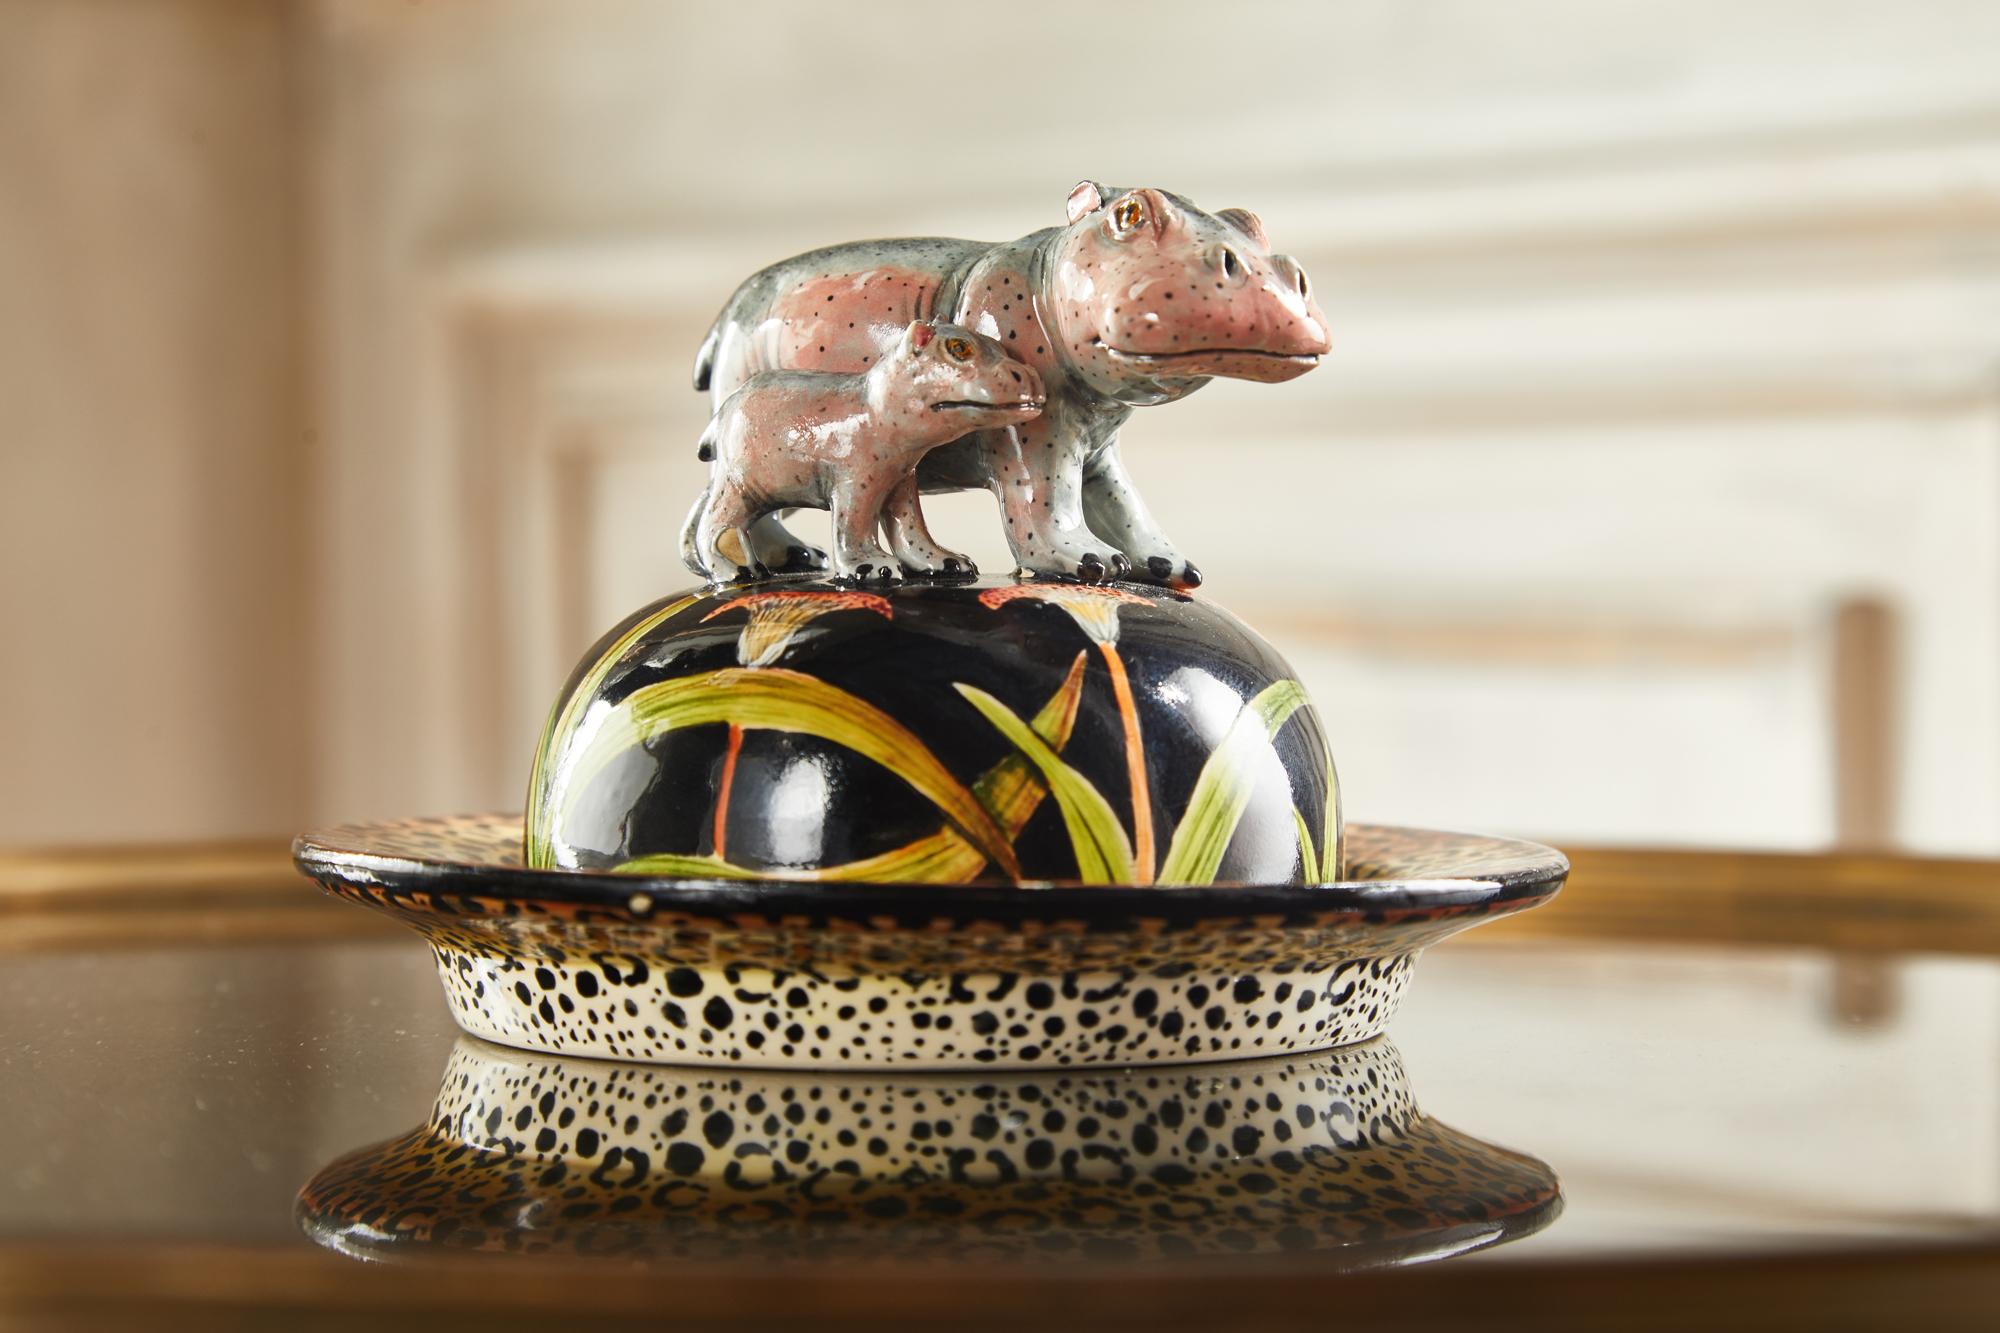 frog butter dish